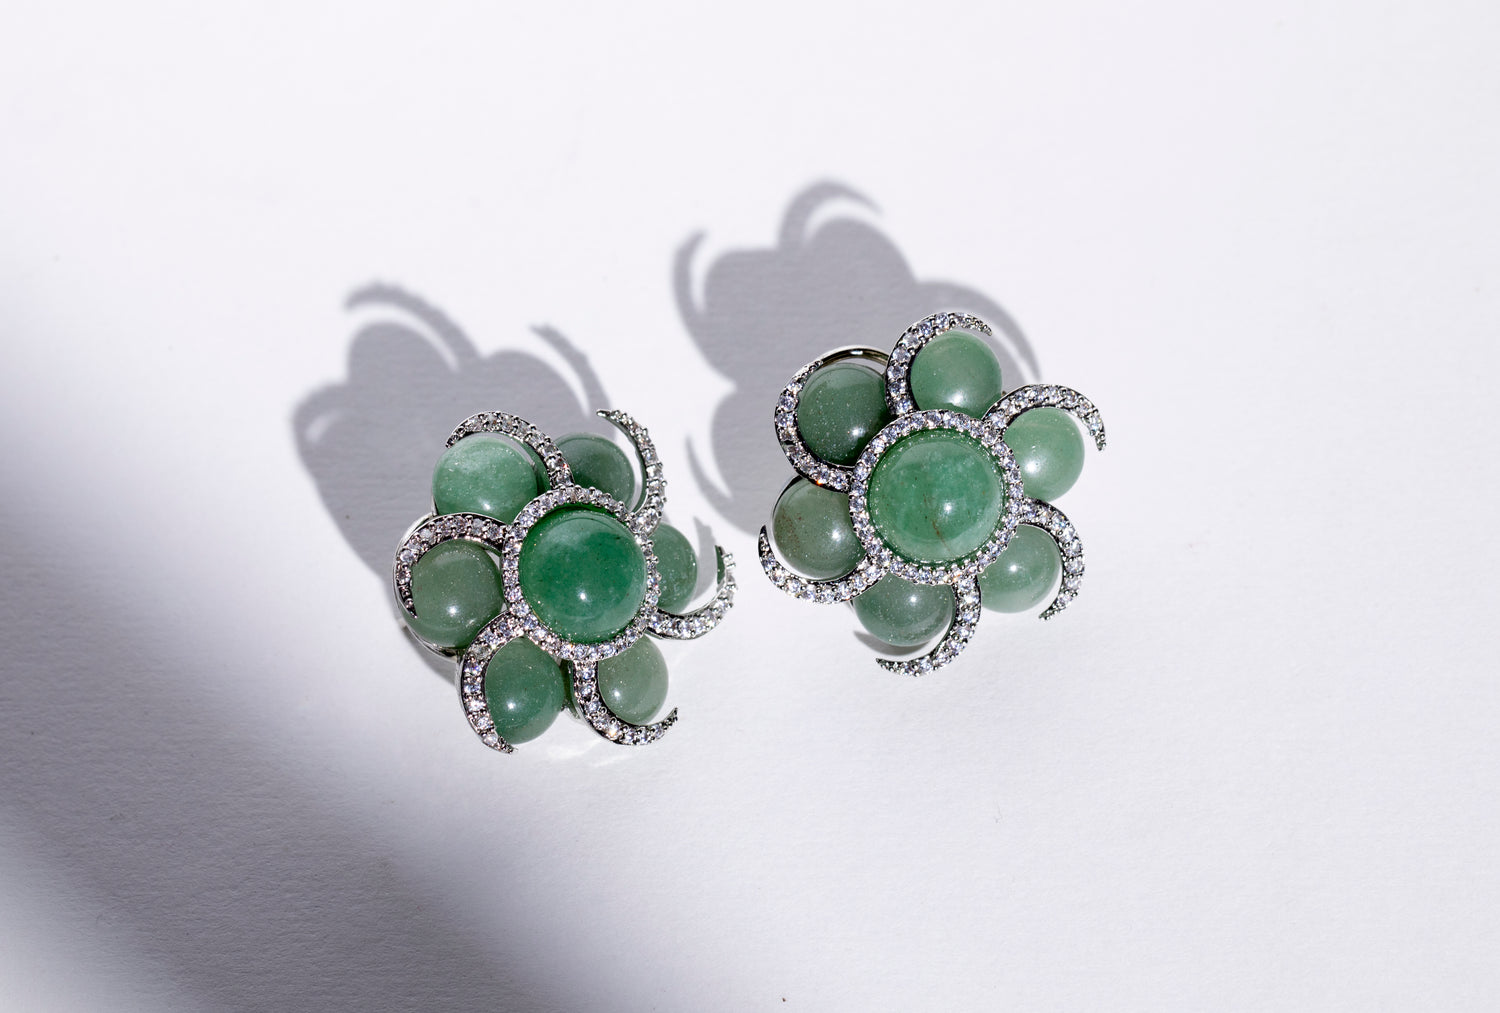 Versatile Green Stone Flower Earrings: Perfect for adding a touch of elegance to any outfit, these earrings are a must-have